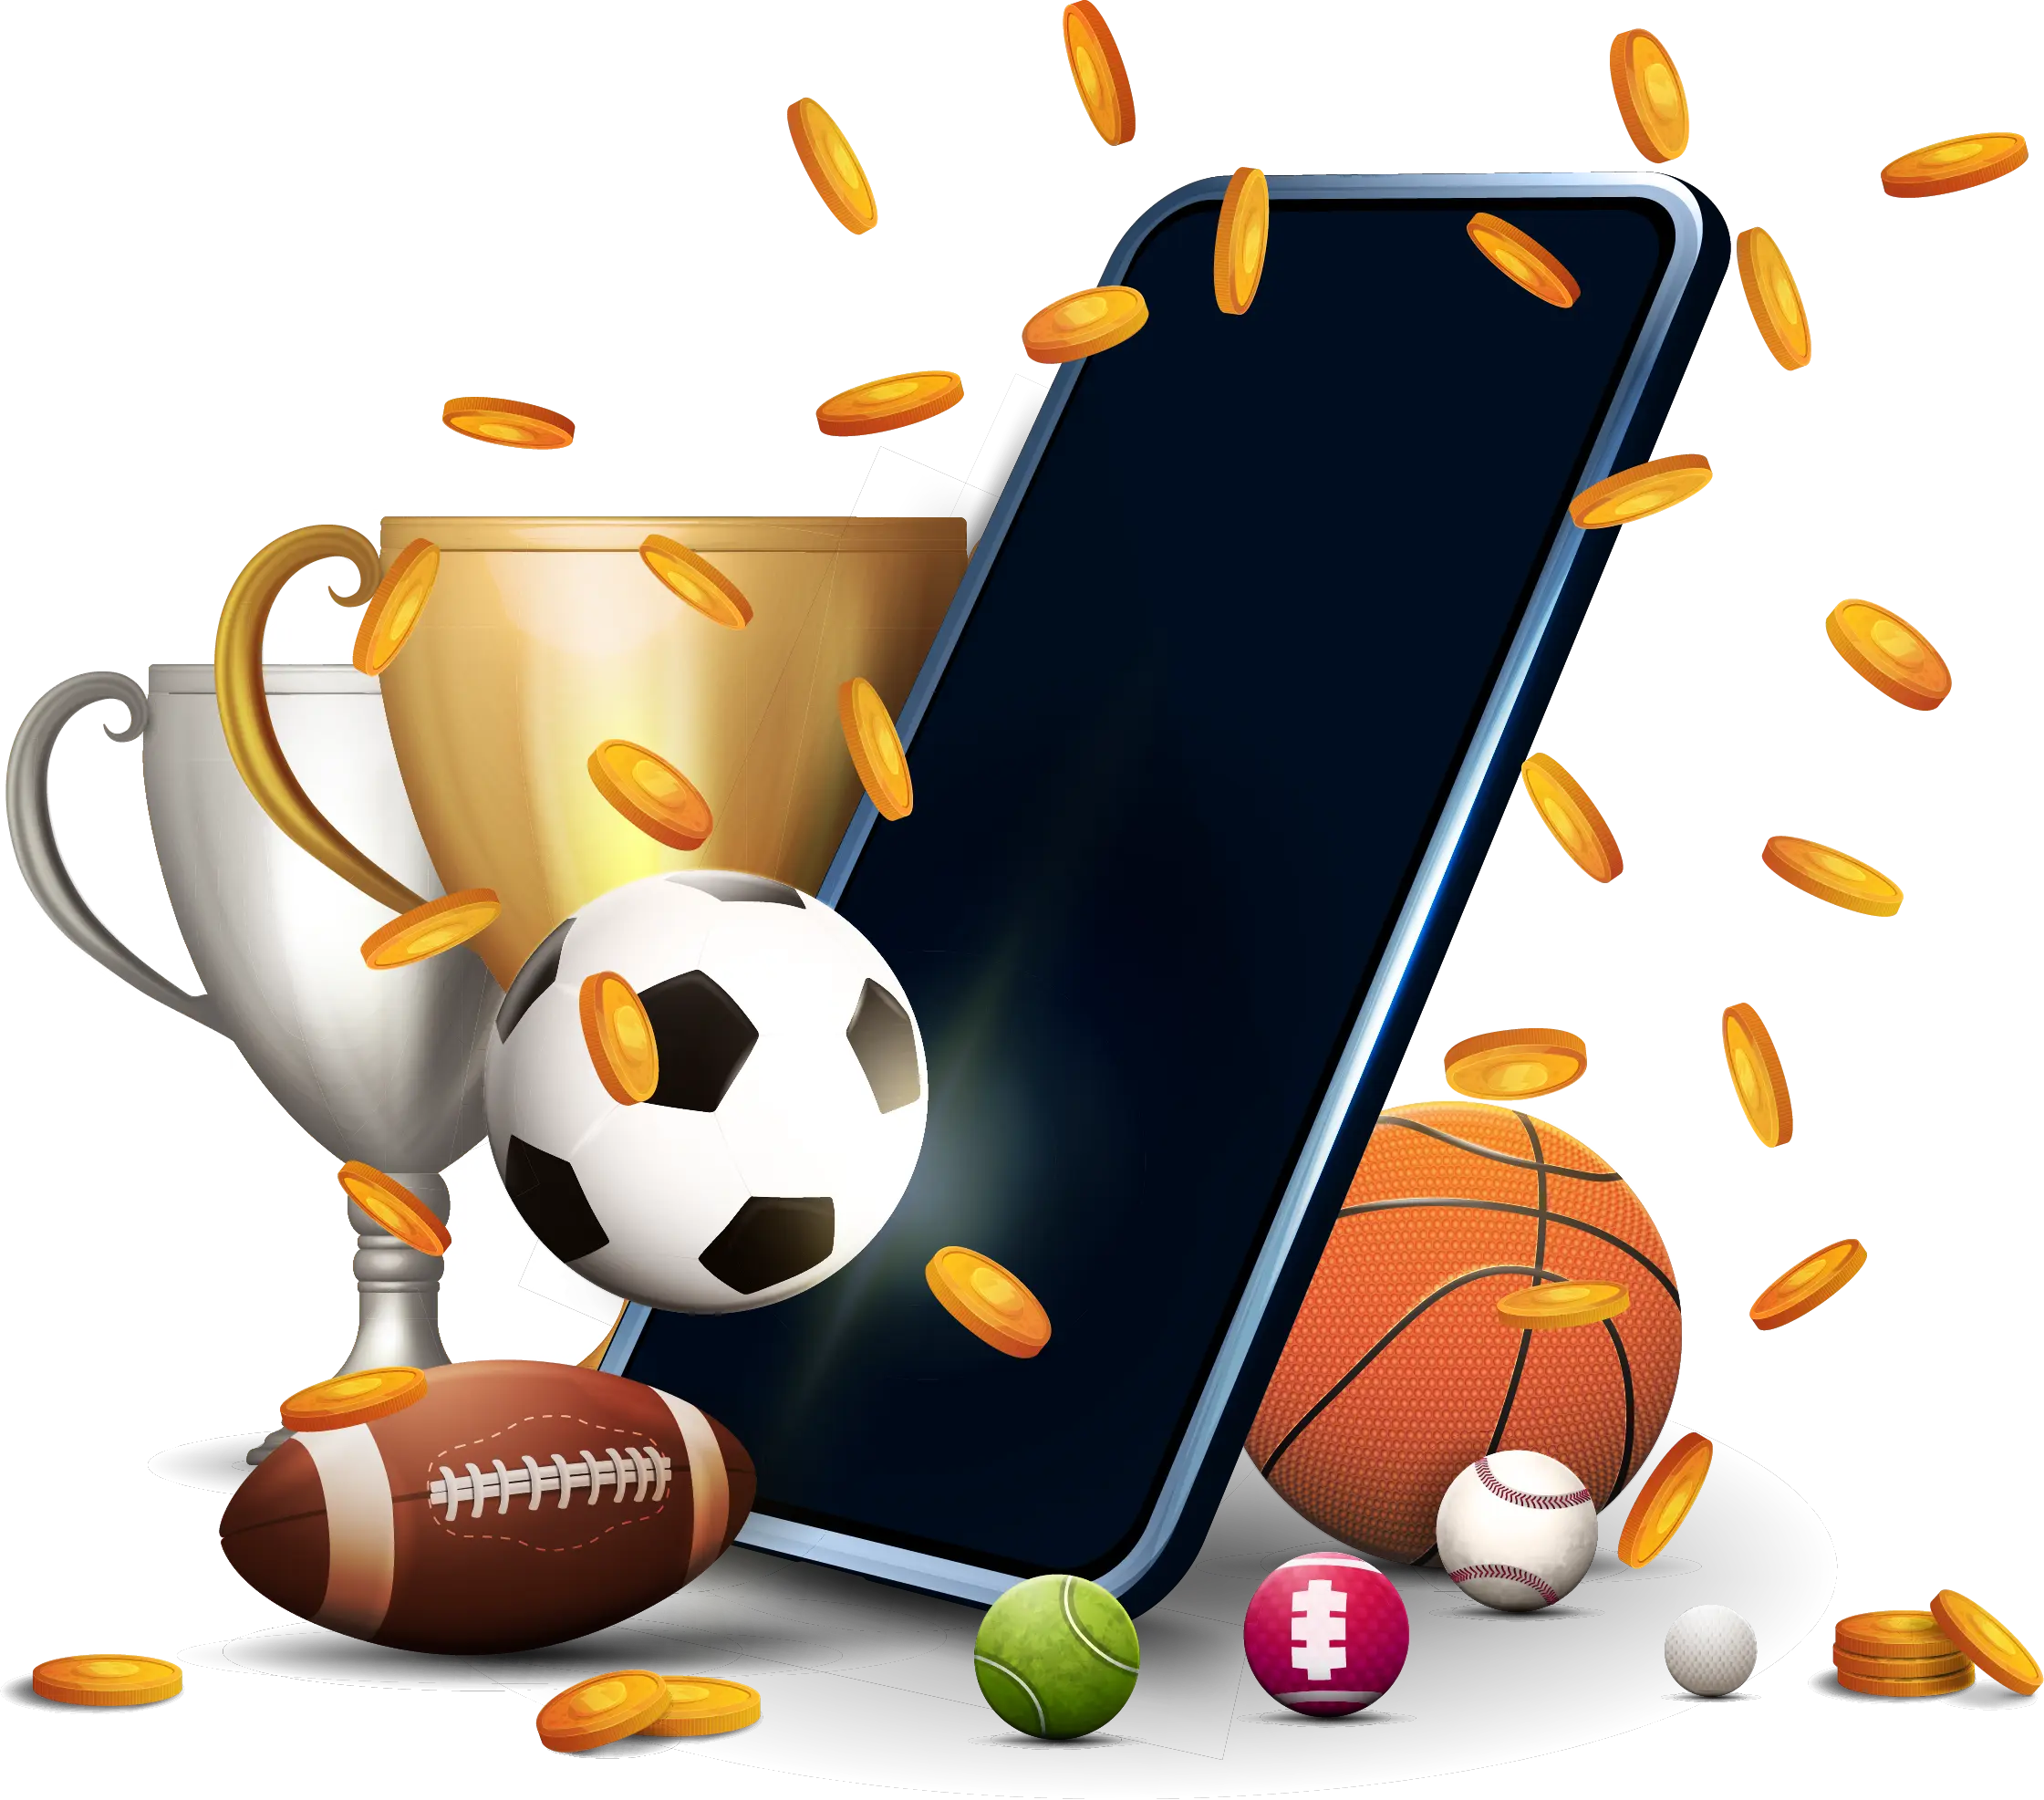 Mobile Betting - Read our article and inform yourself about everything you need to know about Mobile Betting 